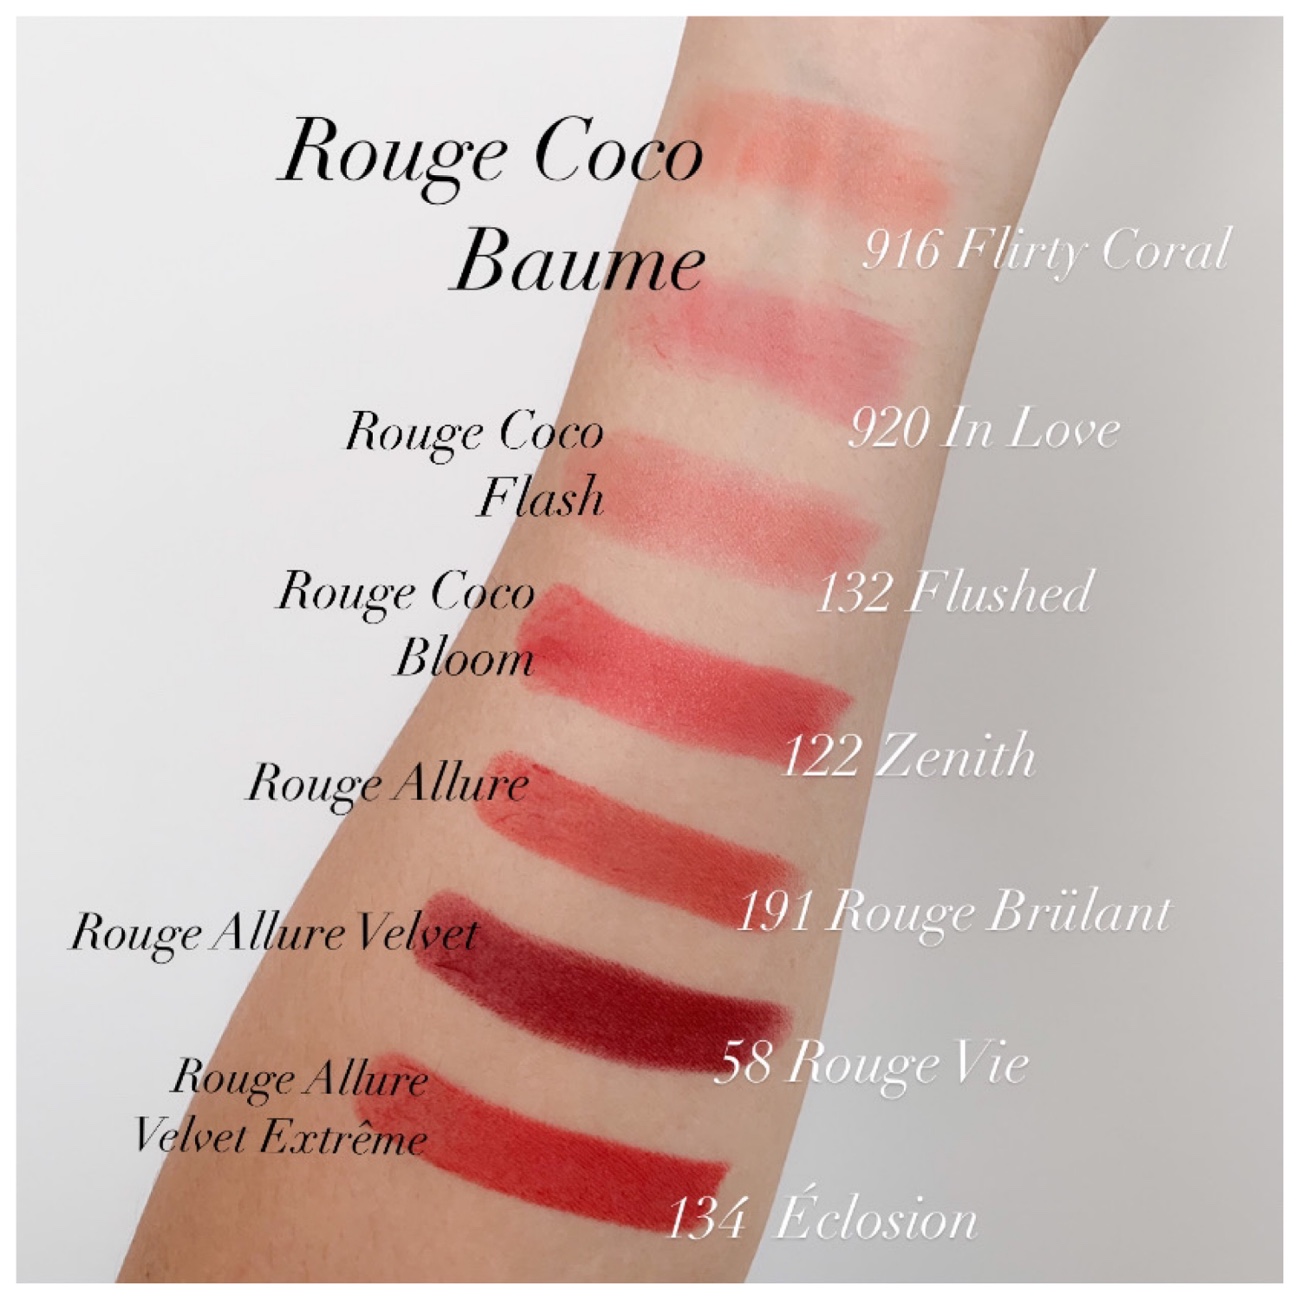 Chanel Fall for Me (924) Rouge Coco Baume Tinted Lip Balm Review & Swatches